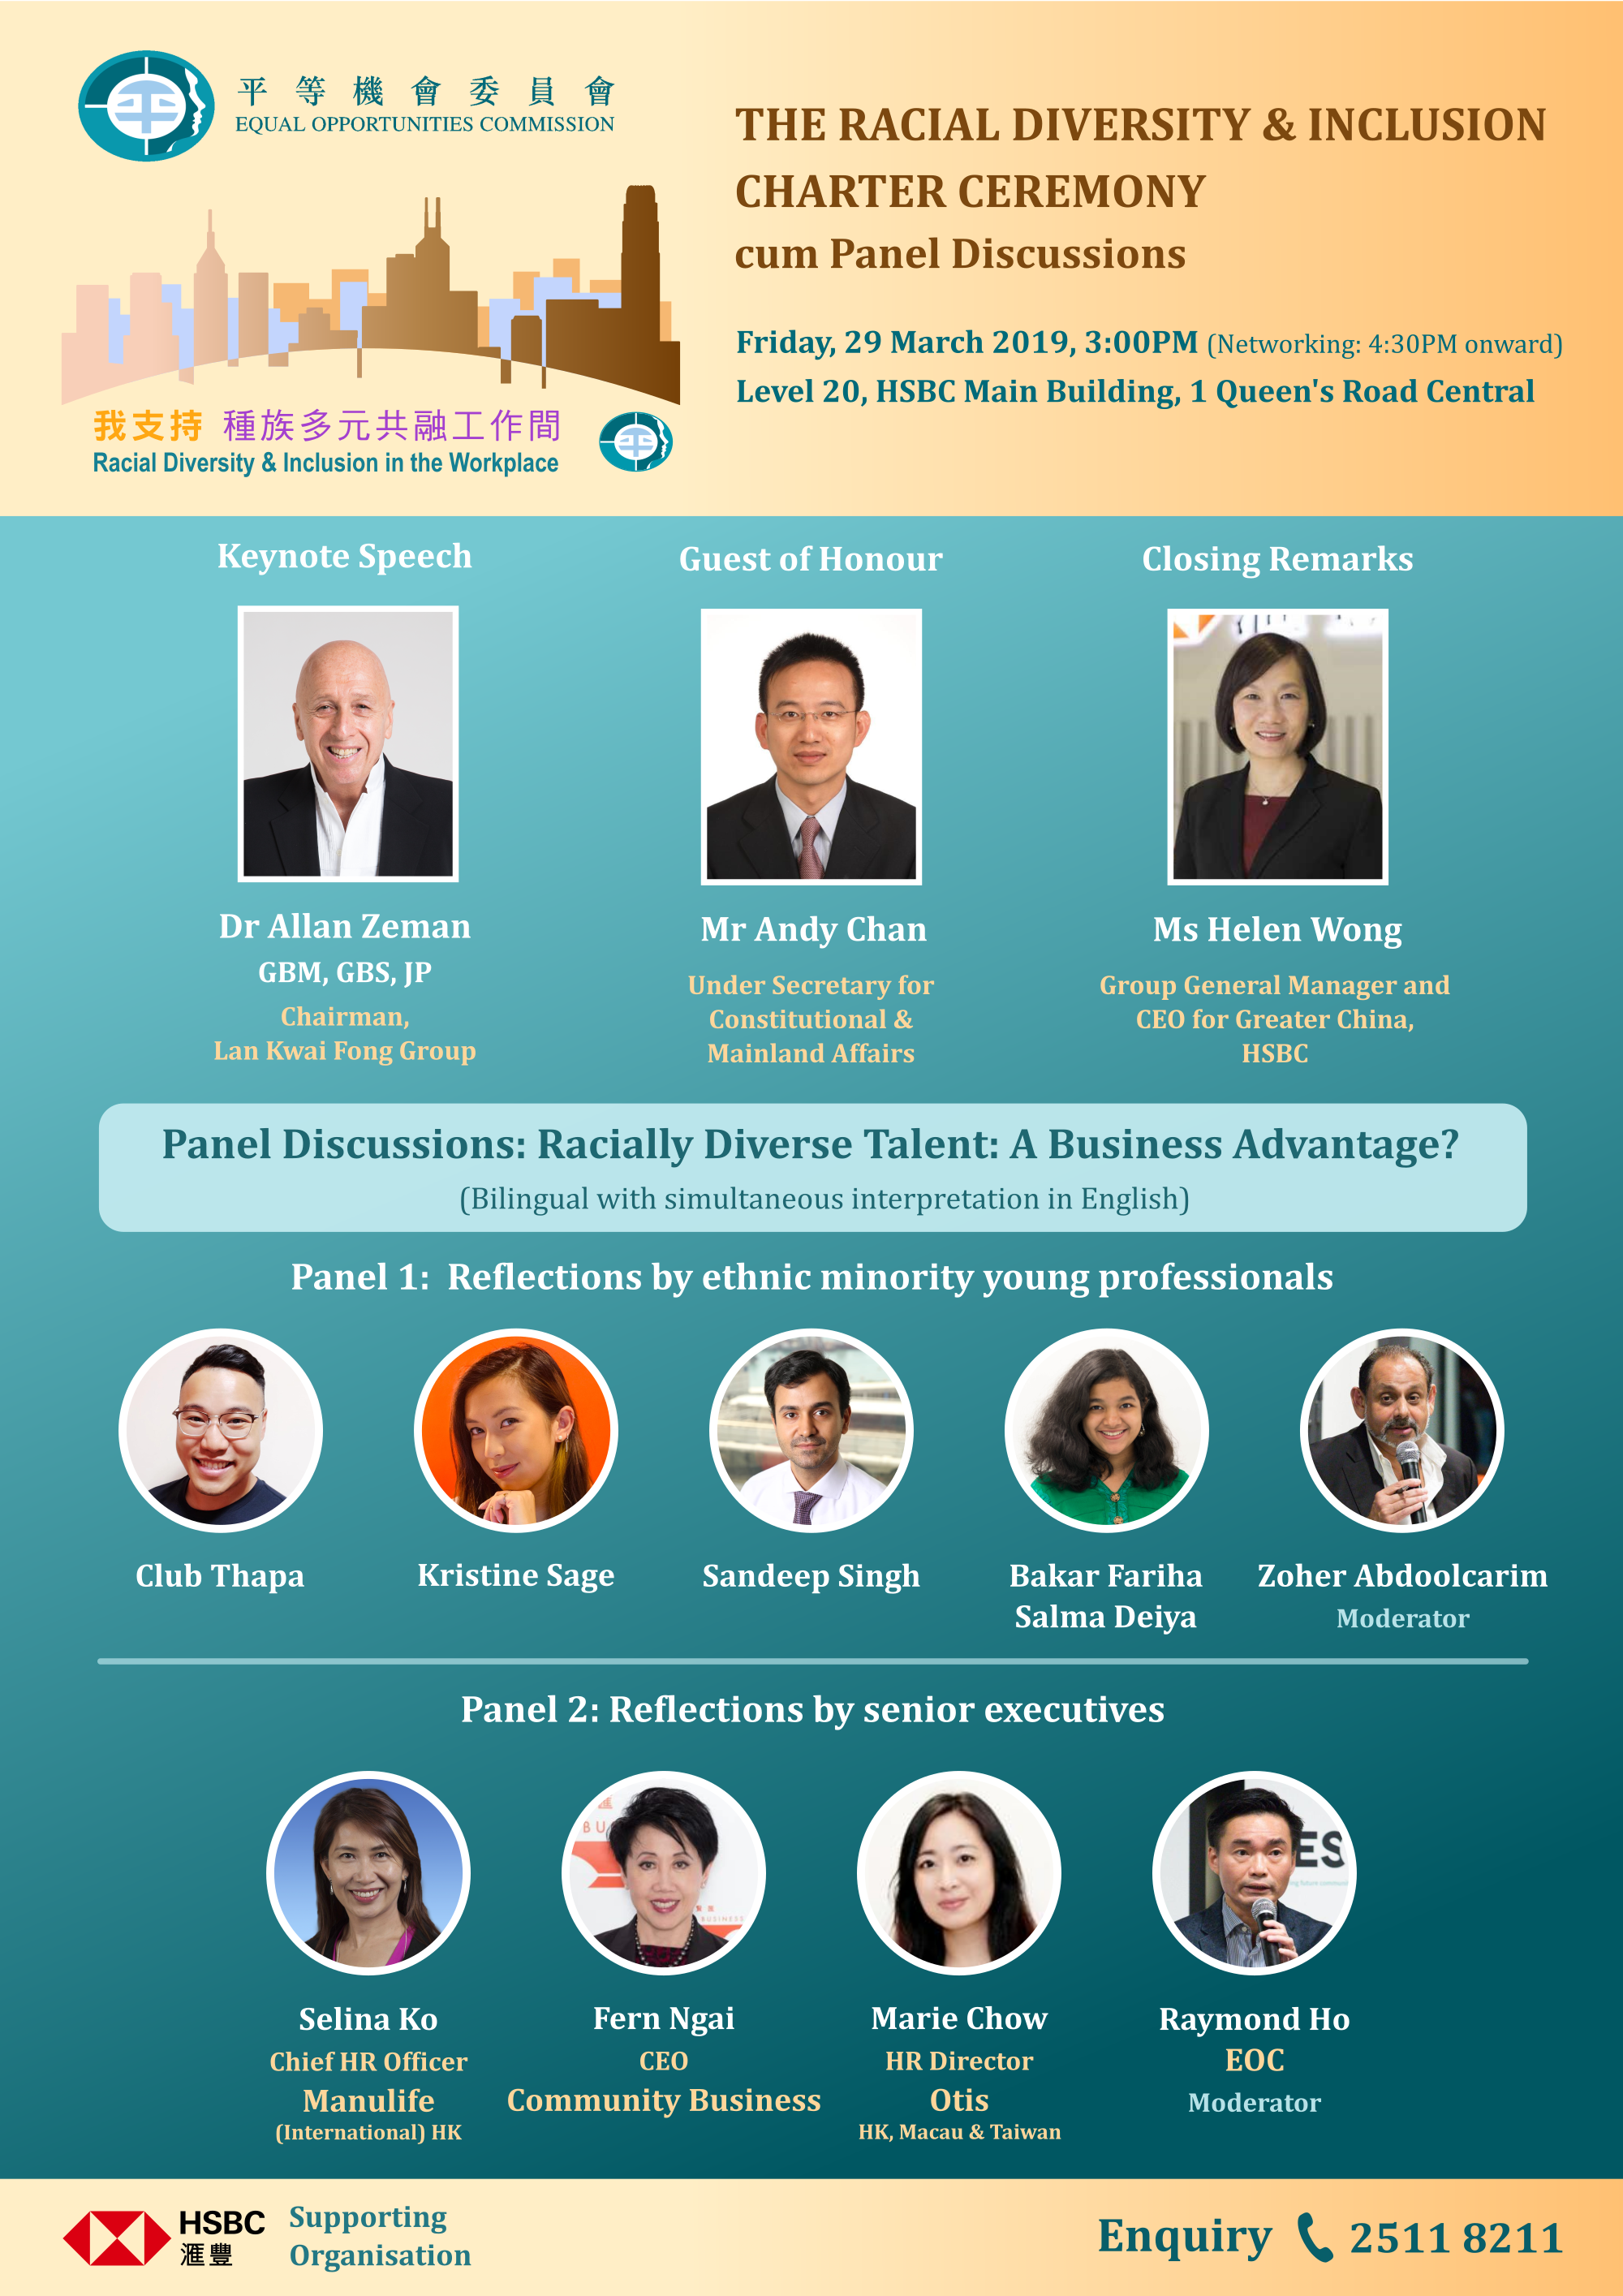 Image of the Hong Kong skyline, with the phrase "Racial Diversity & Inclusion in the Workplace" below and featuring photos of the guests and panelists